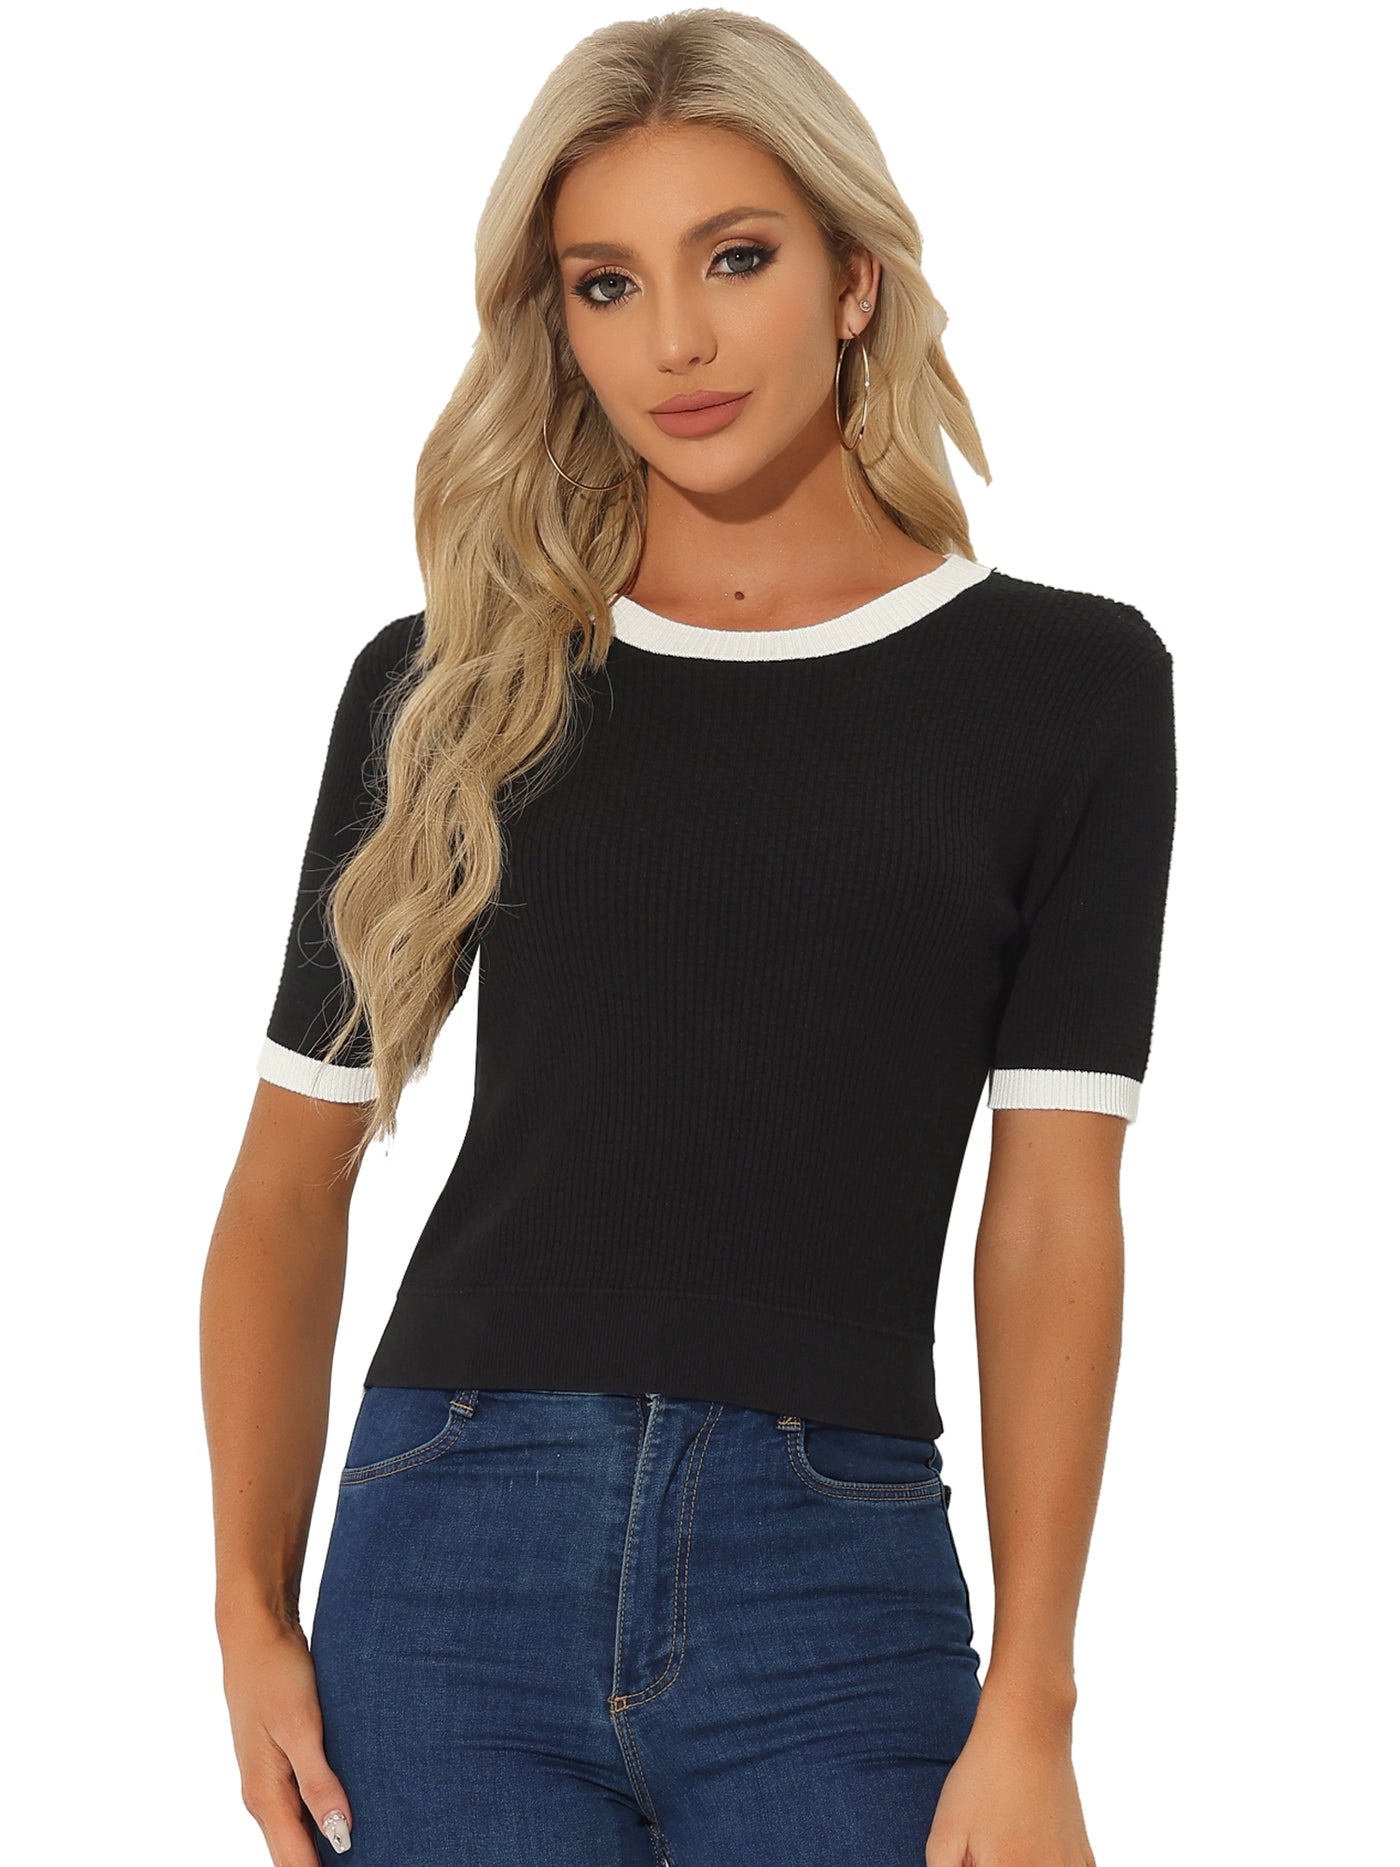 Allegra K Casual Short Sleeve Color Block Knitted Crop Top